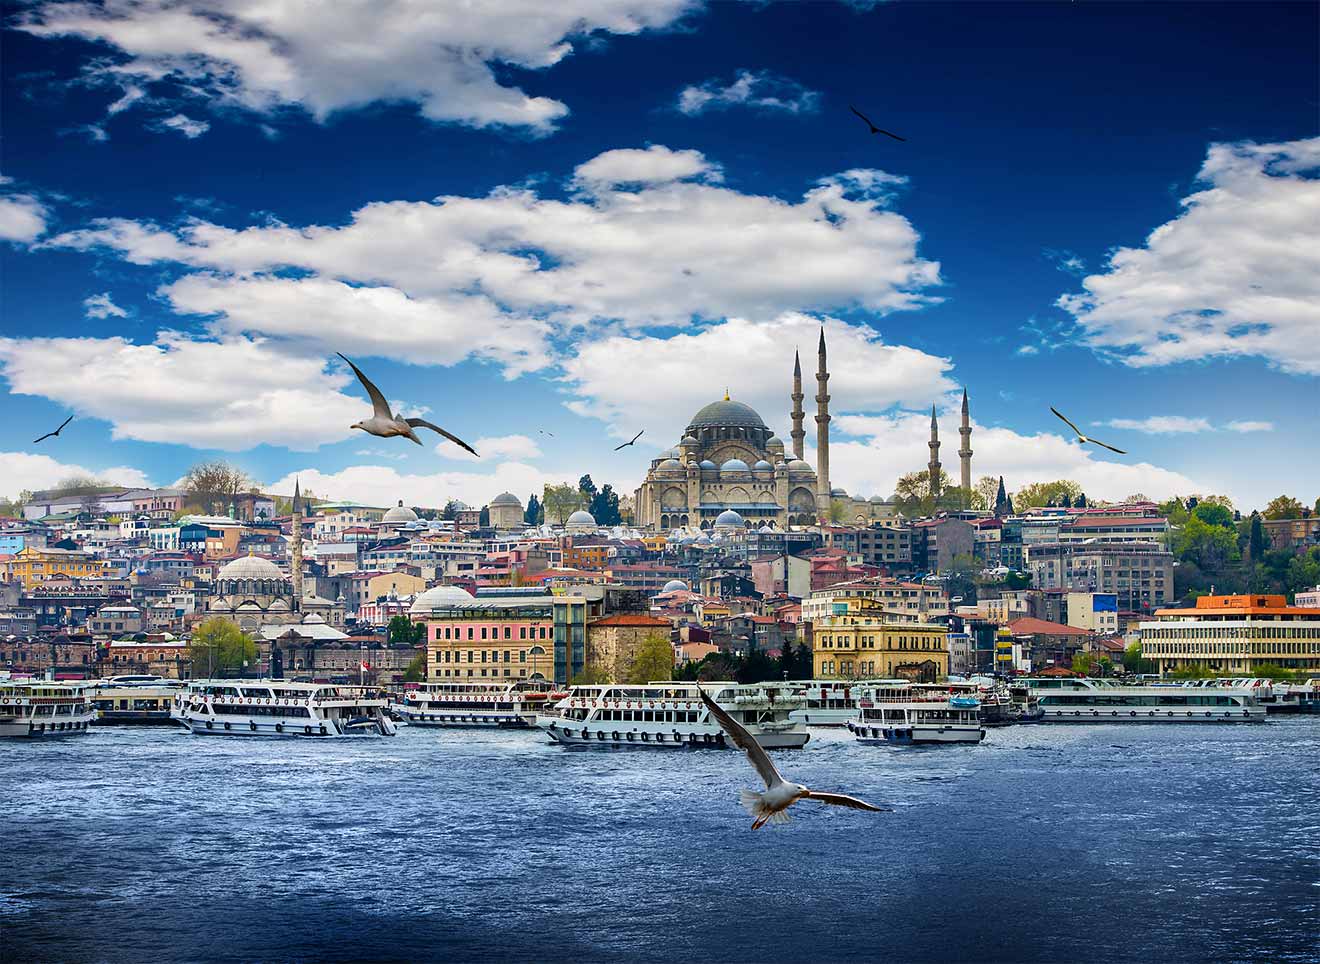 A panoramic view of Istanbul, showcasing the Suleymaniye Mosque towering over the cityscape, with seagulls flying over the Bosphorus and numerous boats docked along the quay under a partly cloudy sky.